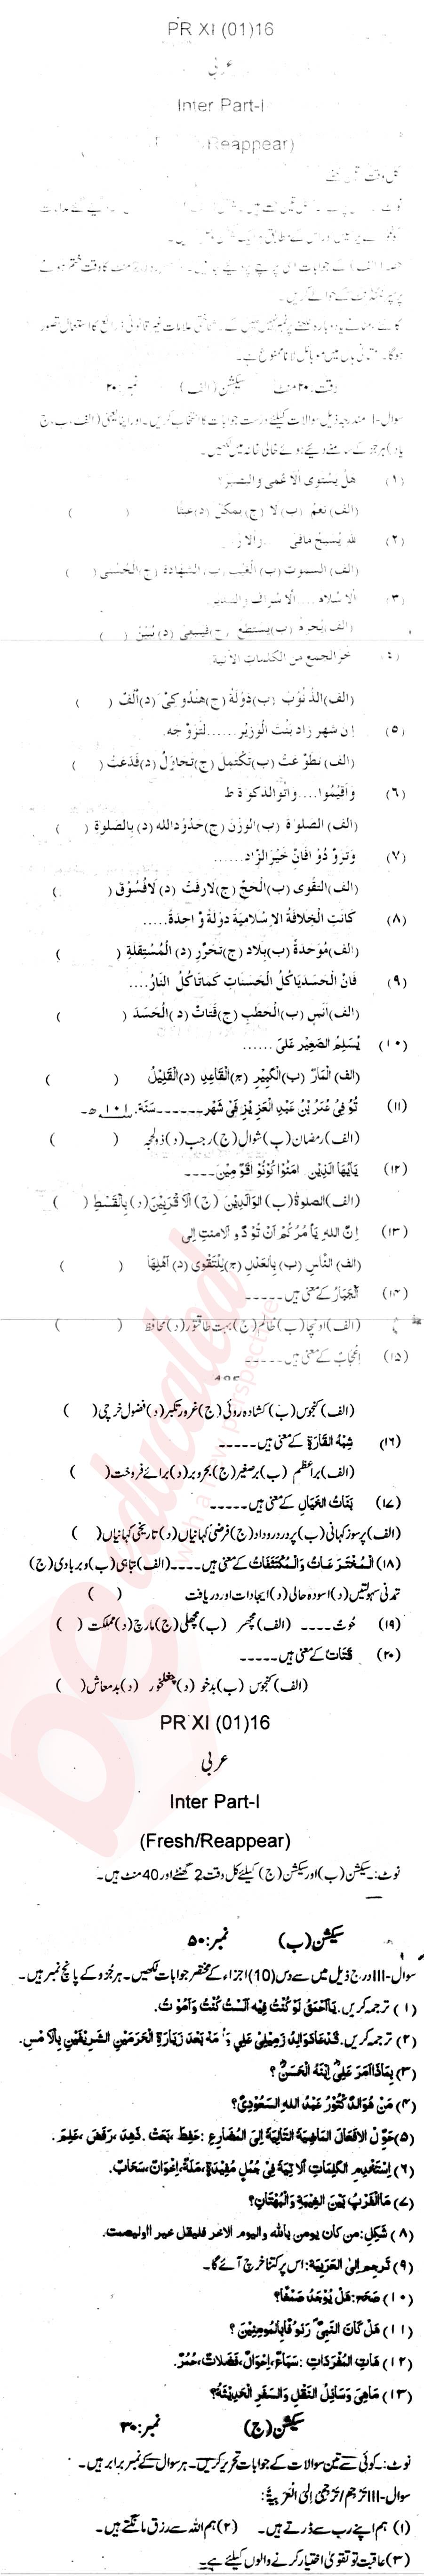 Arabic FA Part 1 Past Paper Group 1 BISE Malakand 2016